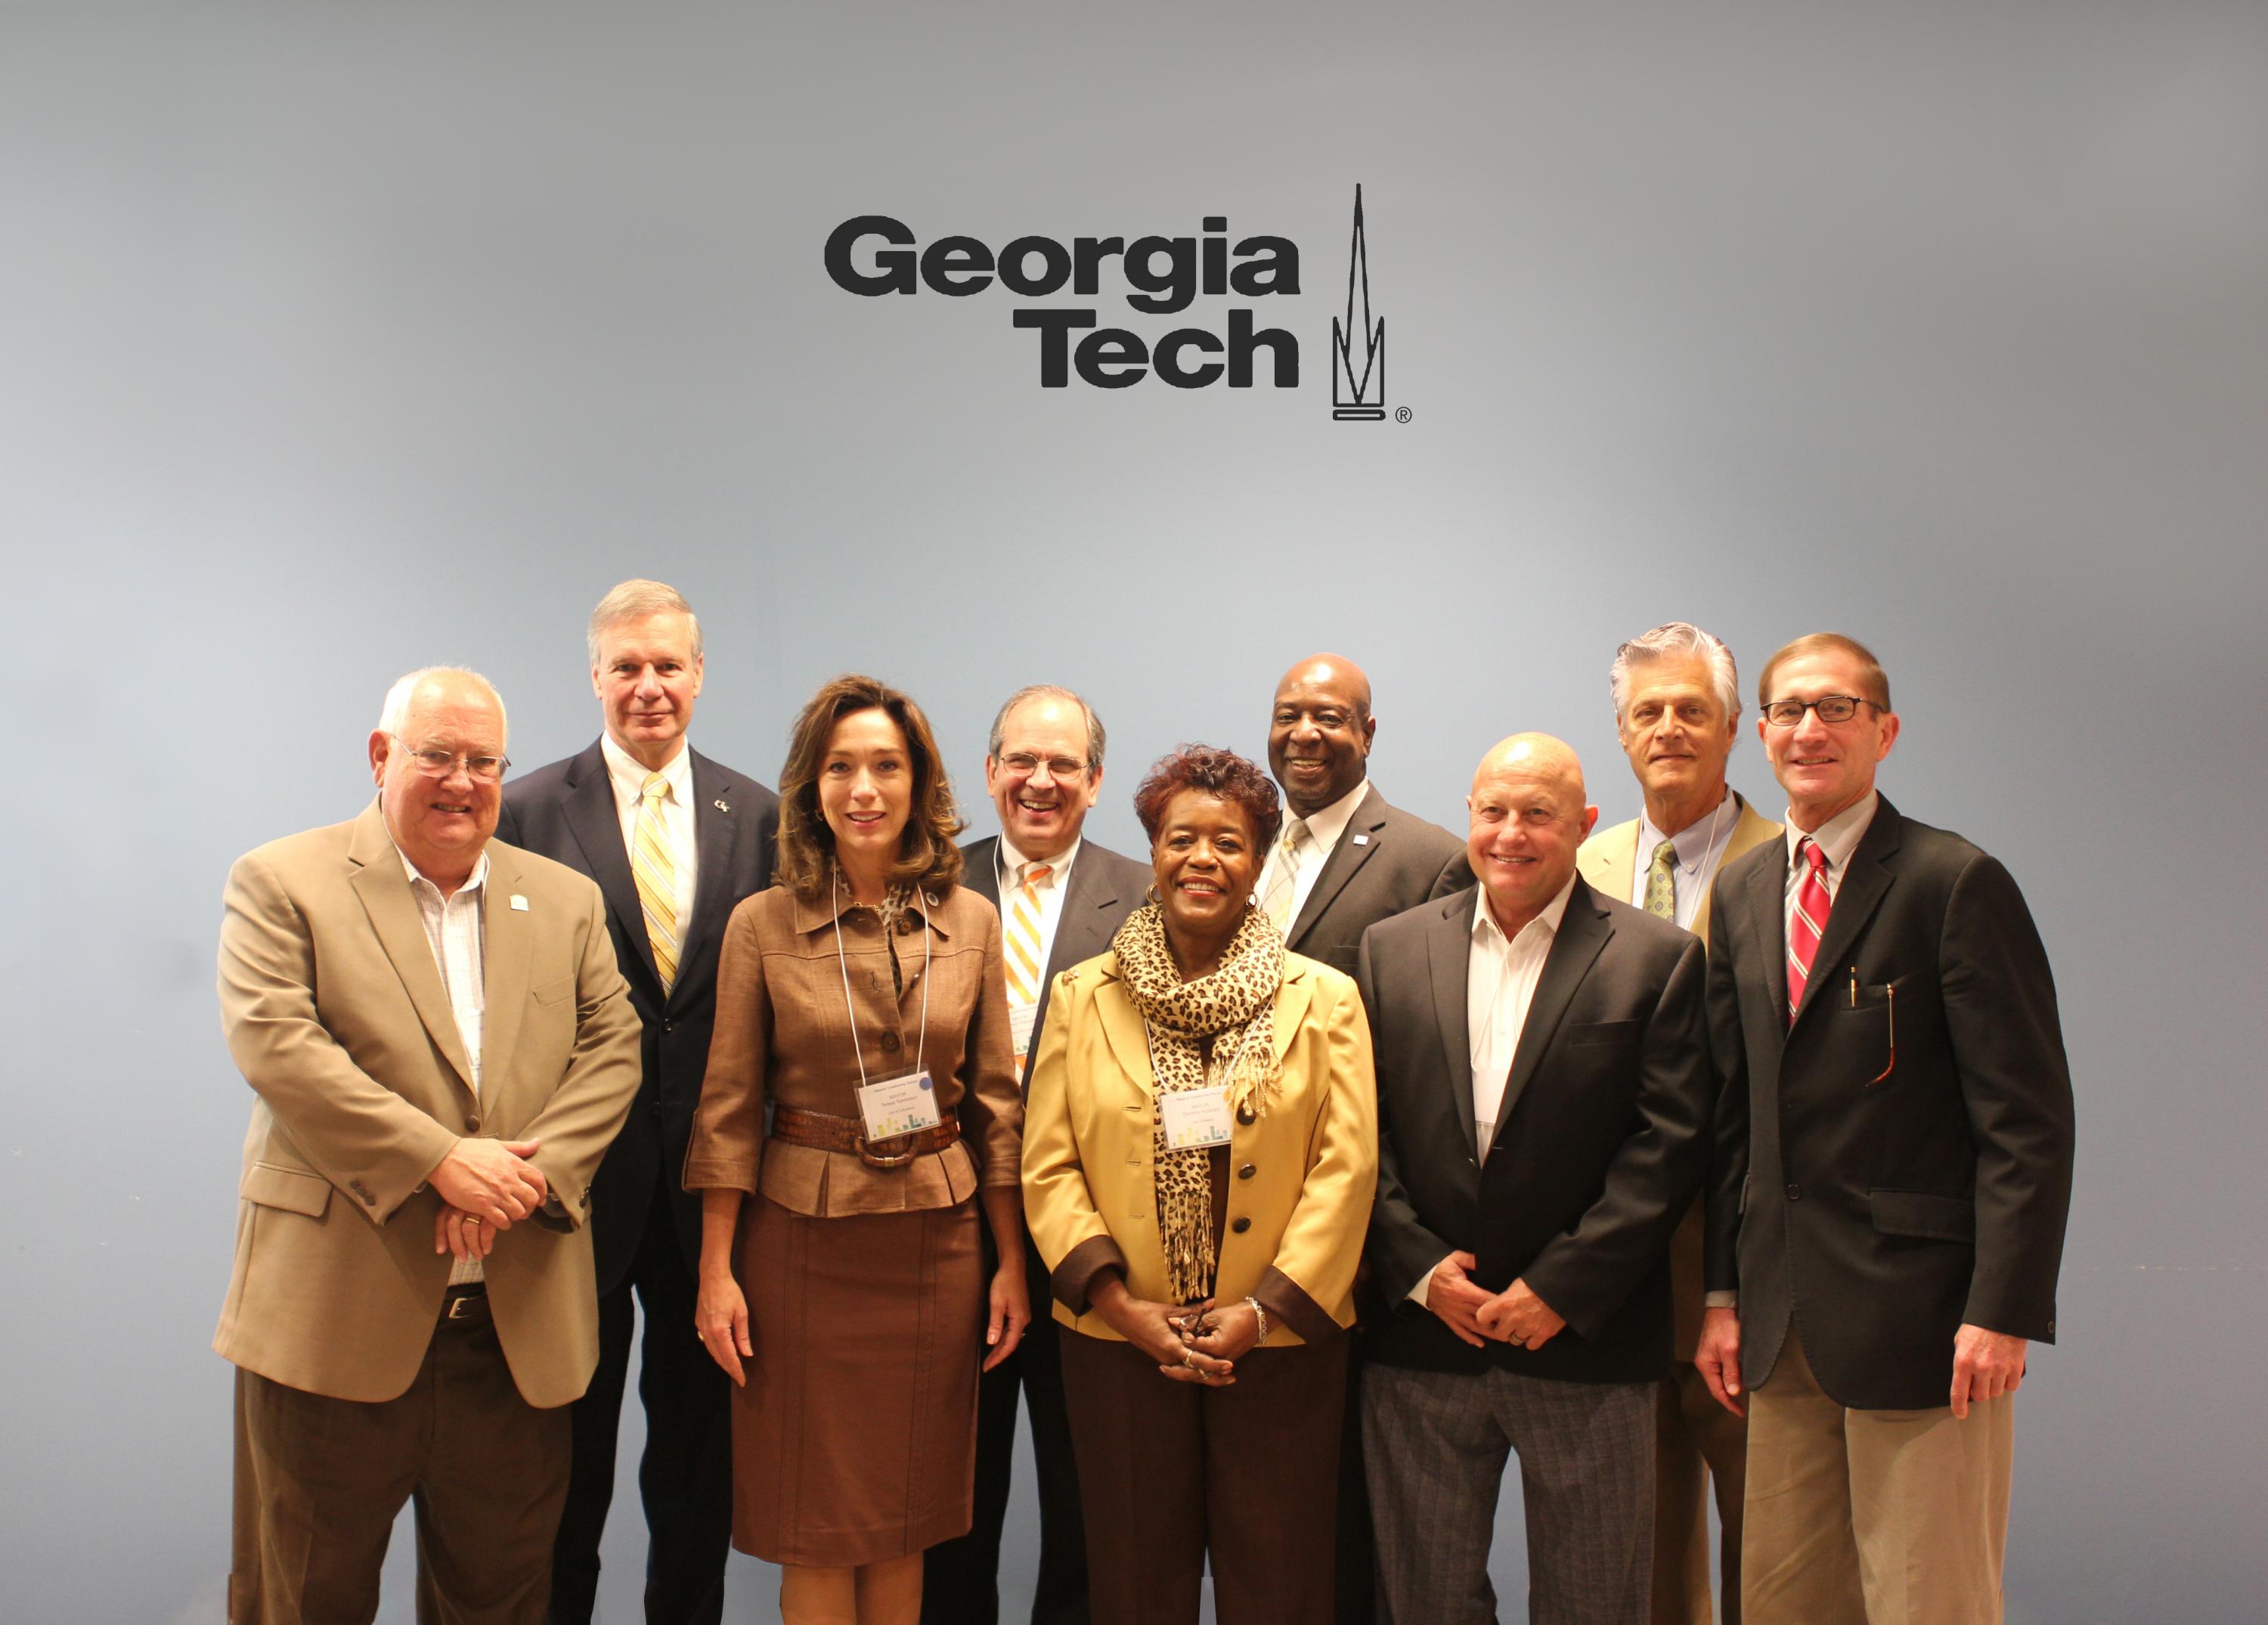 Pictured: Eight Georgia hub city mayors and Georgia Tech President G.P. "Bud" Peterson.